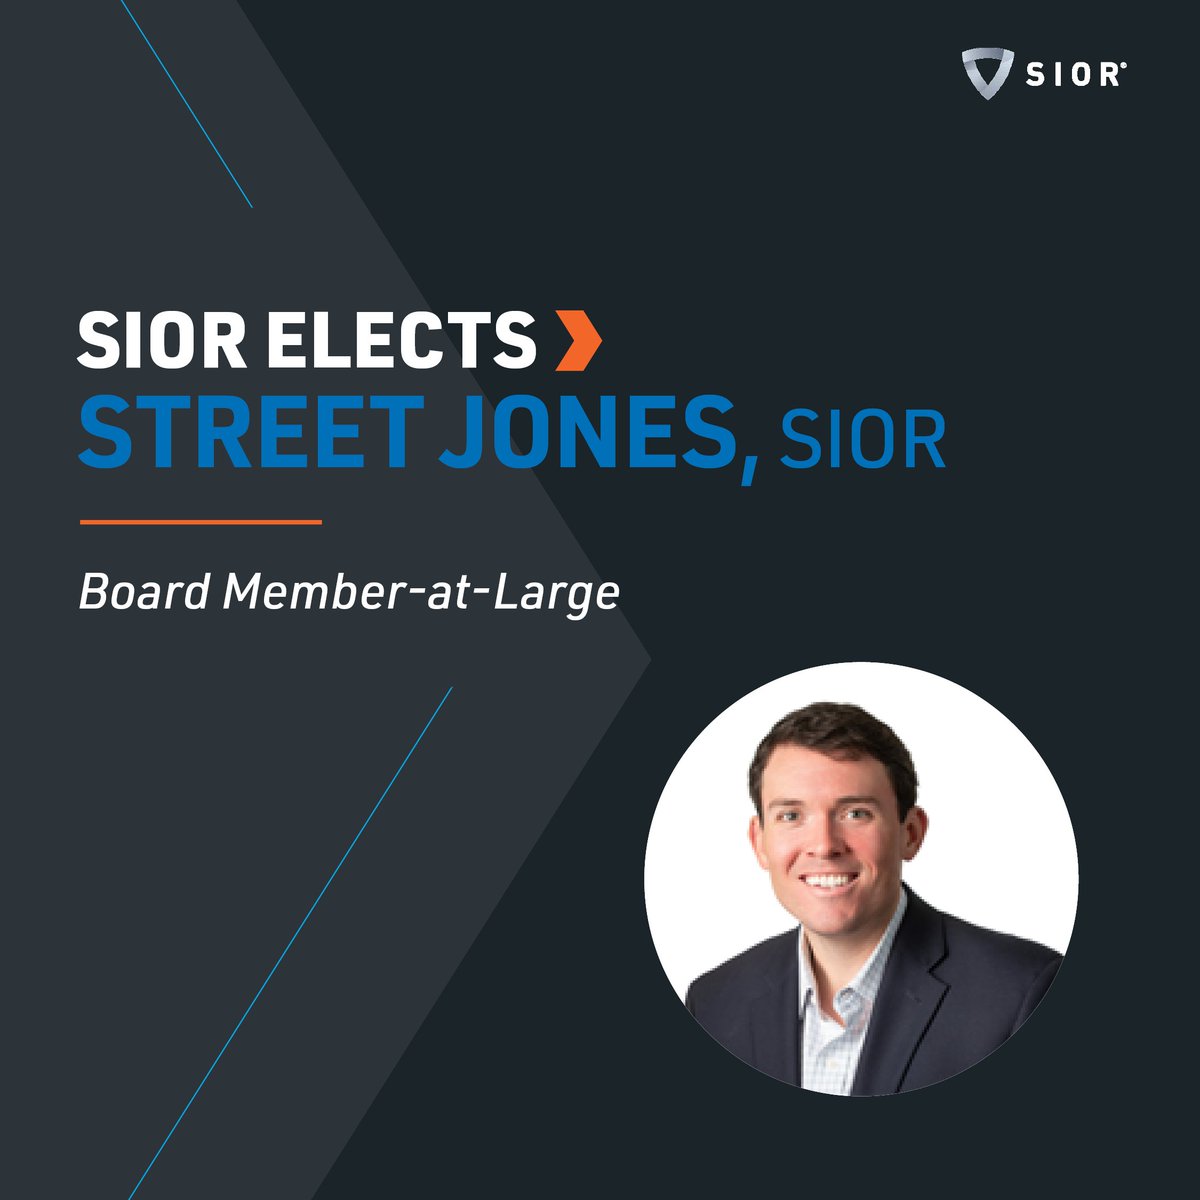 It's an honor to announce that Street Jones, SIOR, has been elected to serve as a Member-at-Large for the #SIOR Board of Directors. With past leadership exp. on both national & chapter level committees, Street will bring years of expertise to his role once inducted this fall.